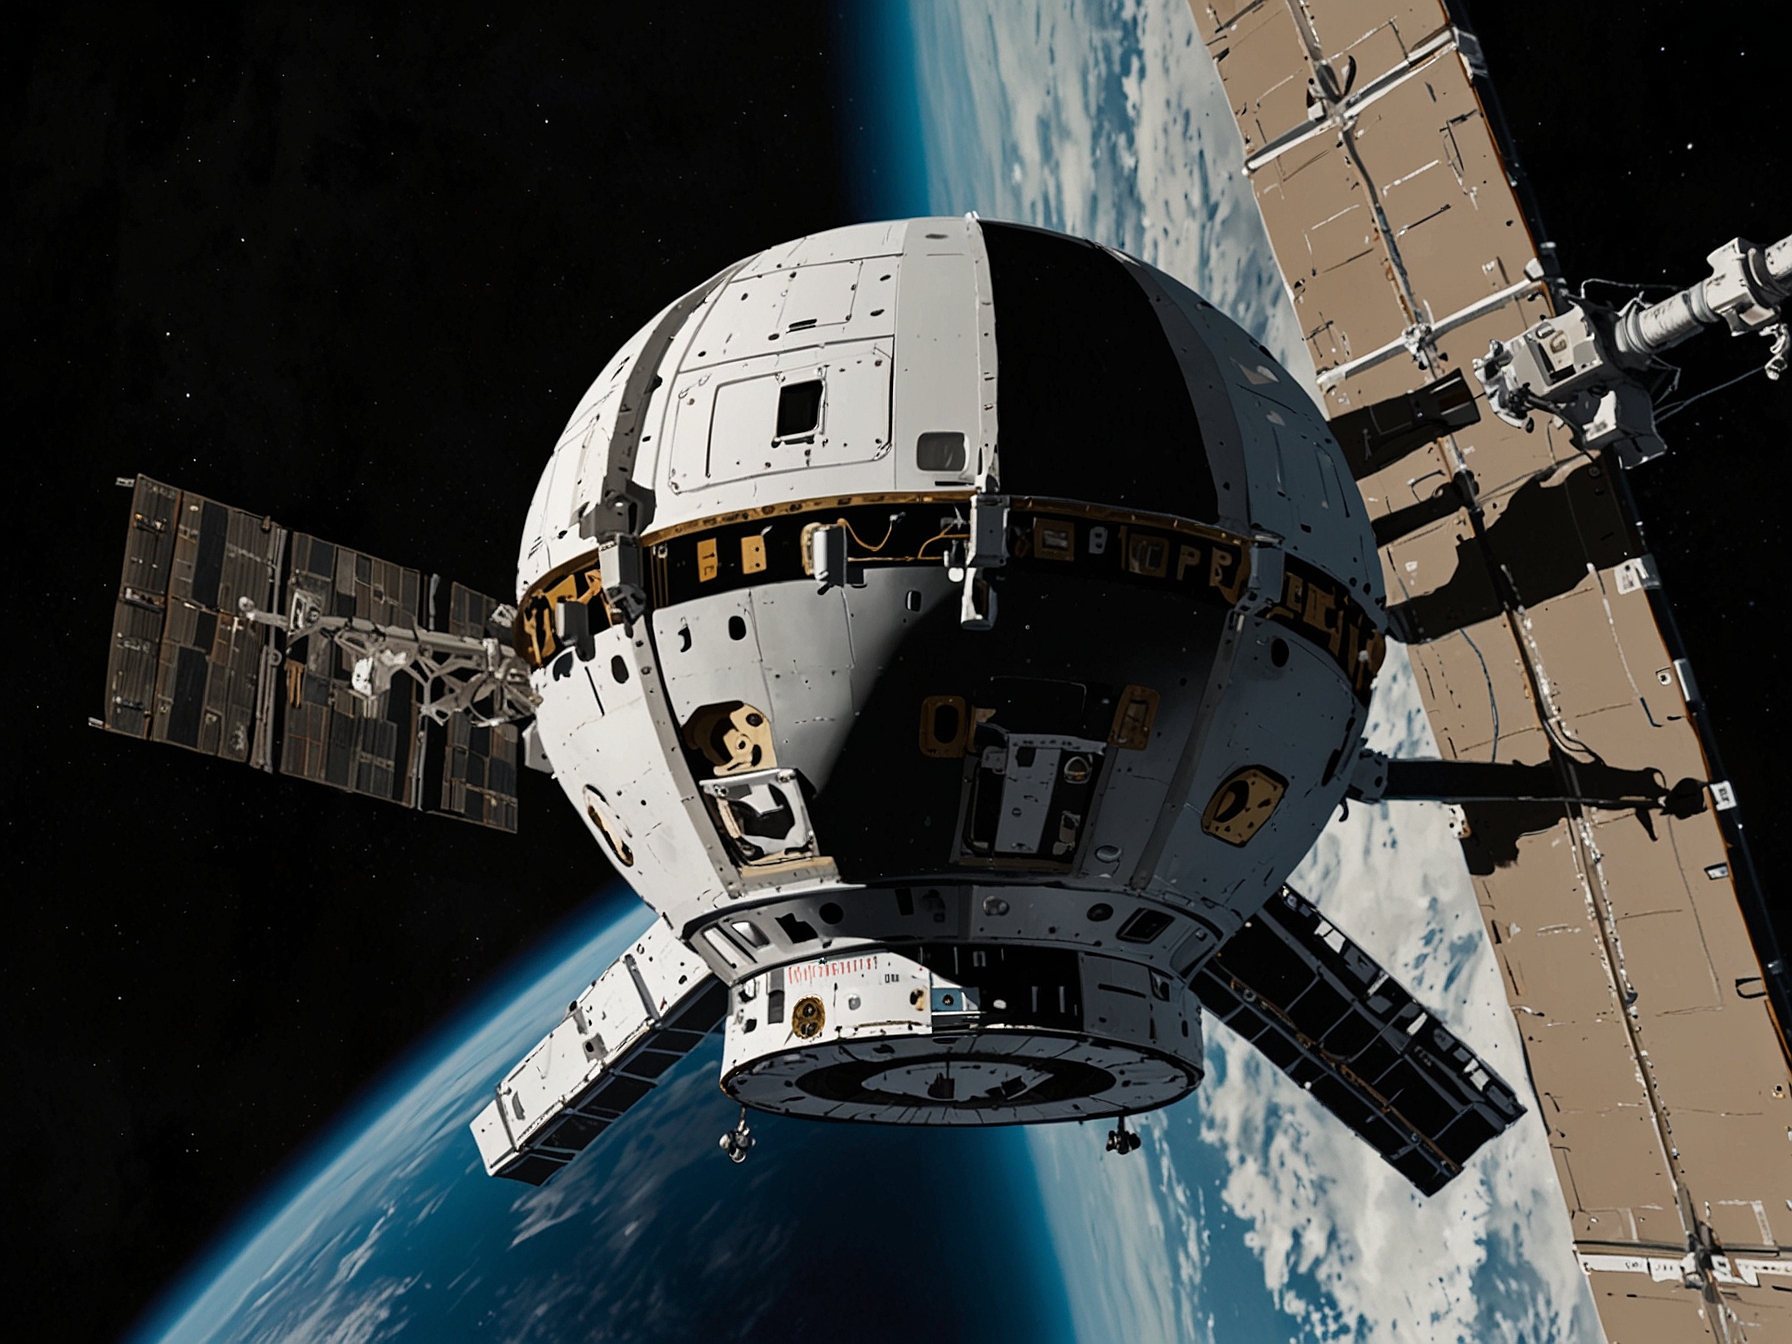 Image of the Boeing Starliner spacecraft docked at the International Space Station, with astronauts Butch Wilmore and Suni Williams conducting checks and maintaining systems onboard.